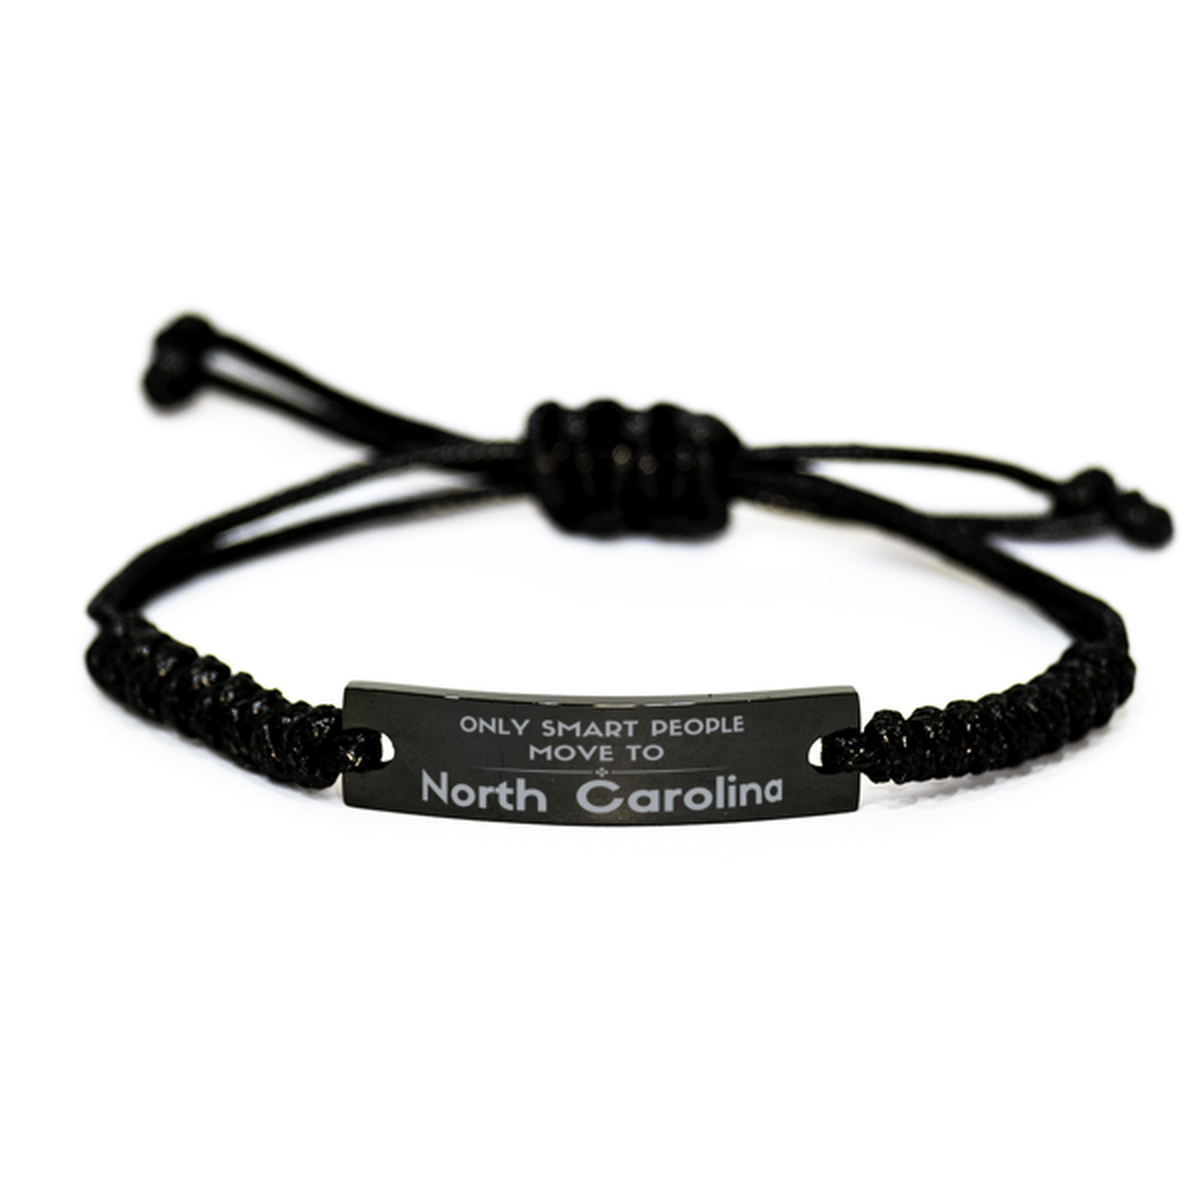 Only smart people move to North Carolina Black Rope Bracelet, Gag Gifts For North Carolina, Move to North Carolina Gifts for Friends Coworker Funny Saying Quote